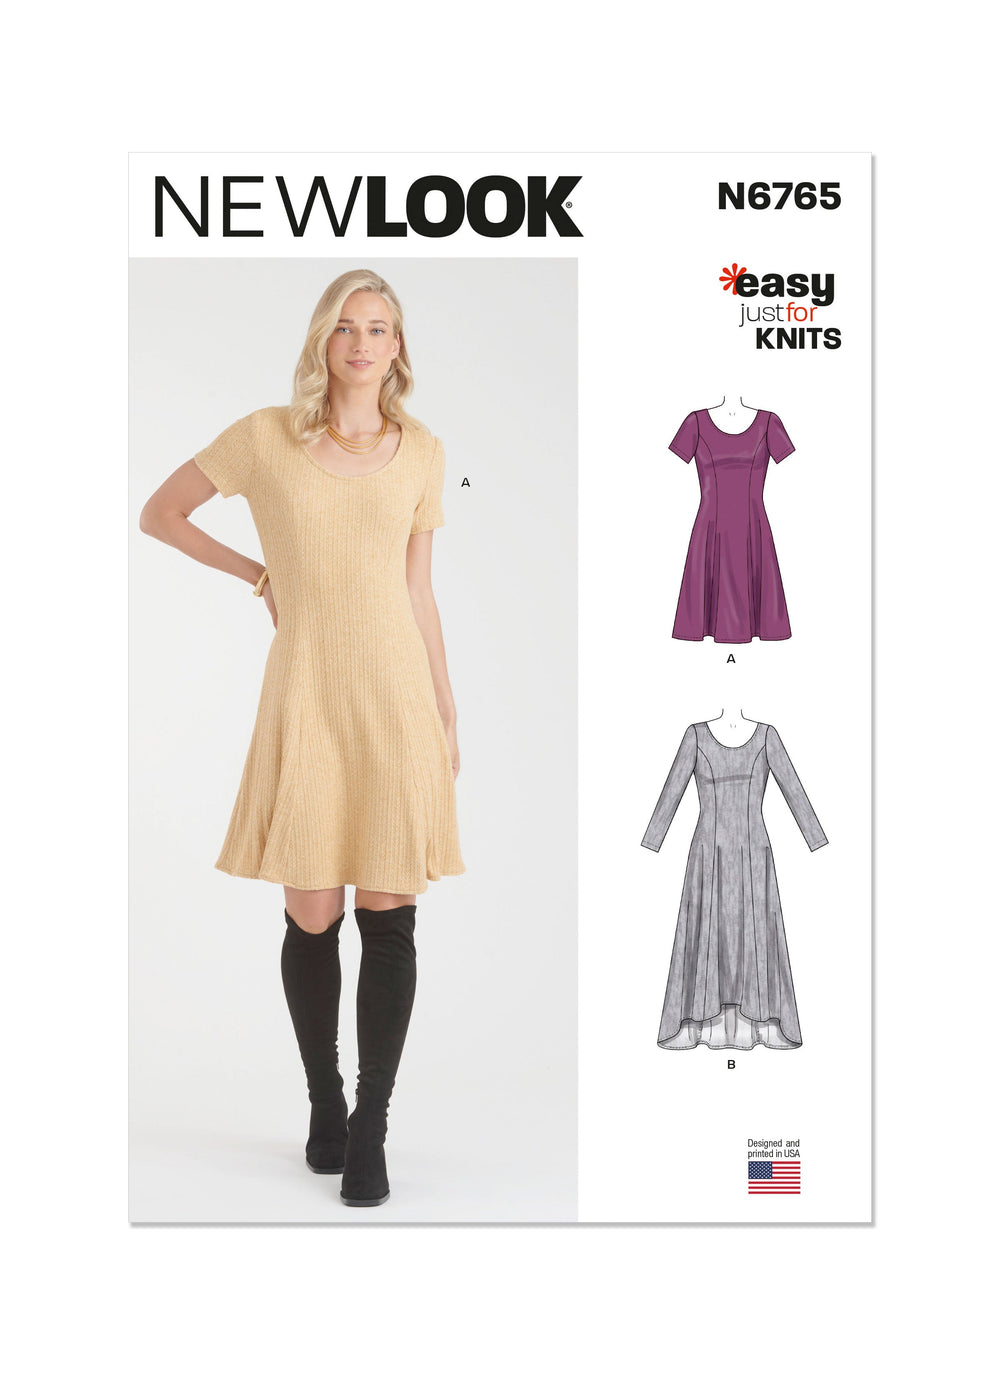 New Look Sewing Pattern 6765 Misses' Knit Dresses from Jaycotts Sewing Supplies